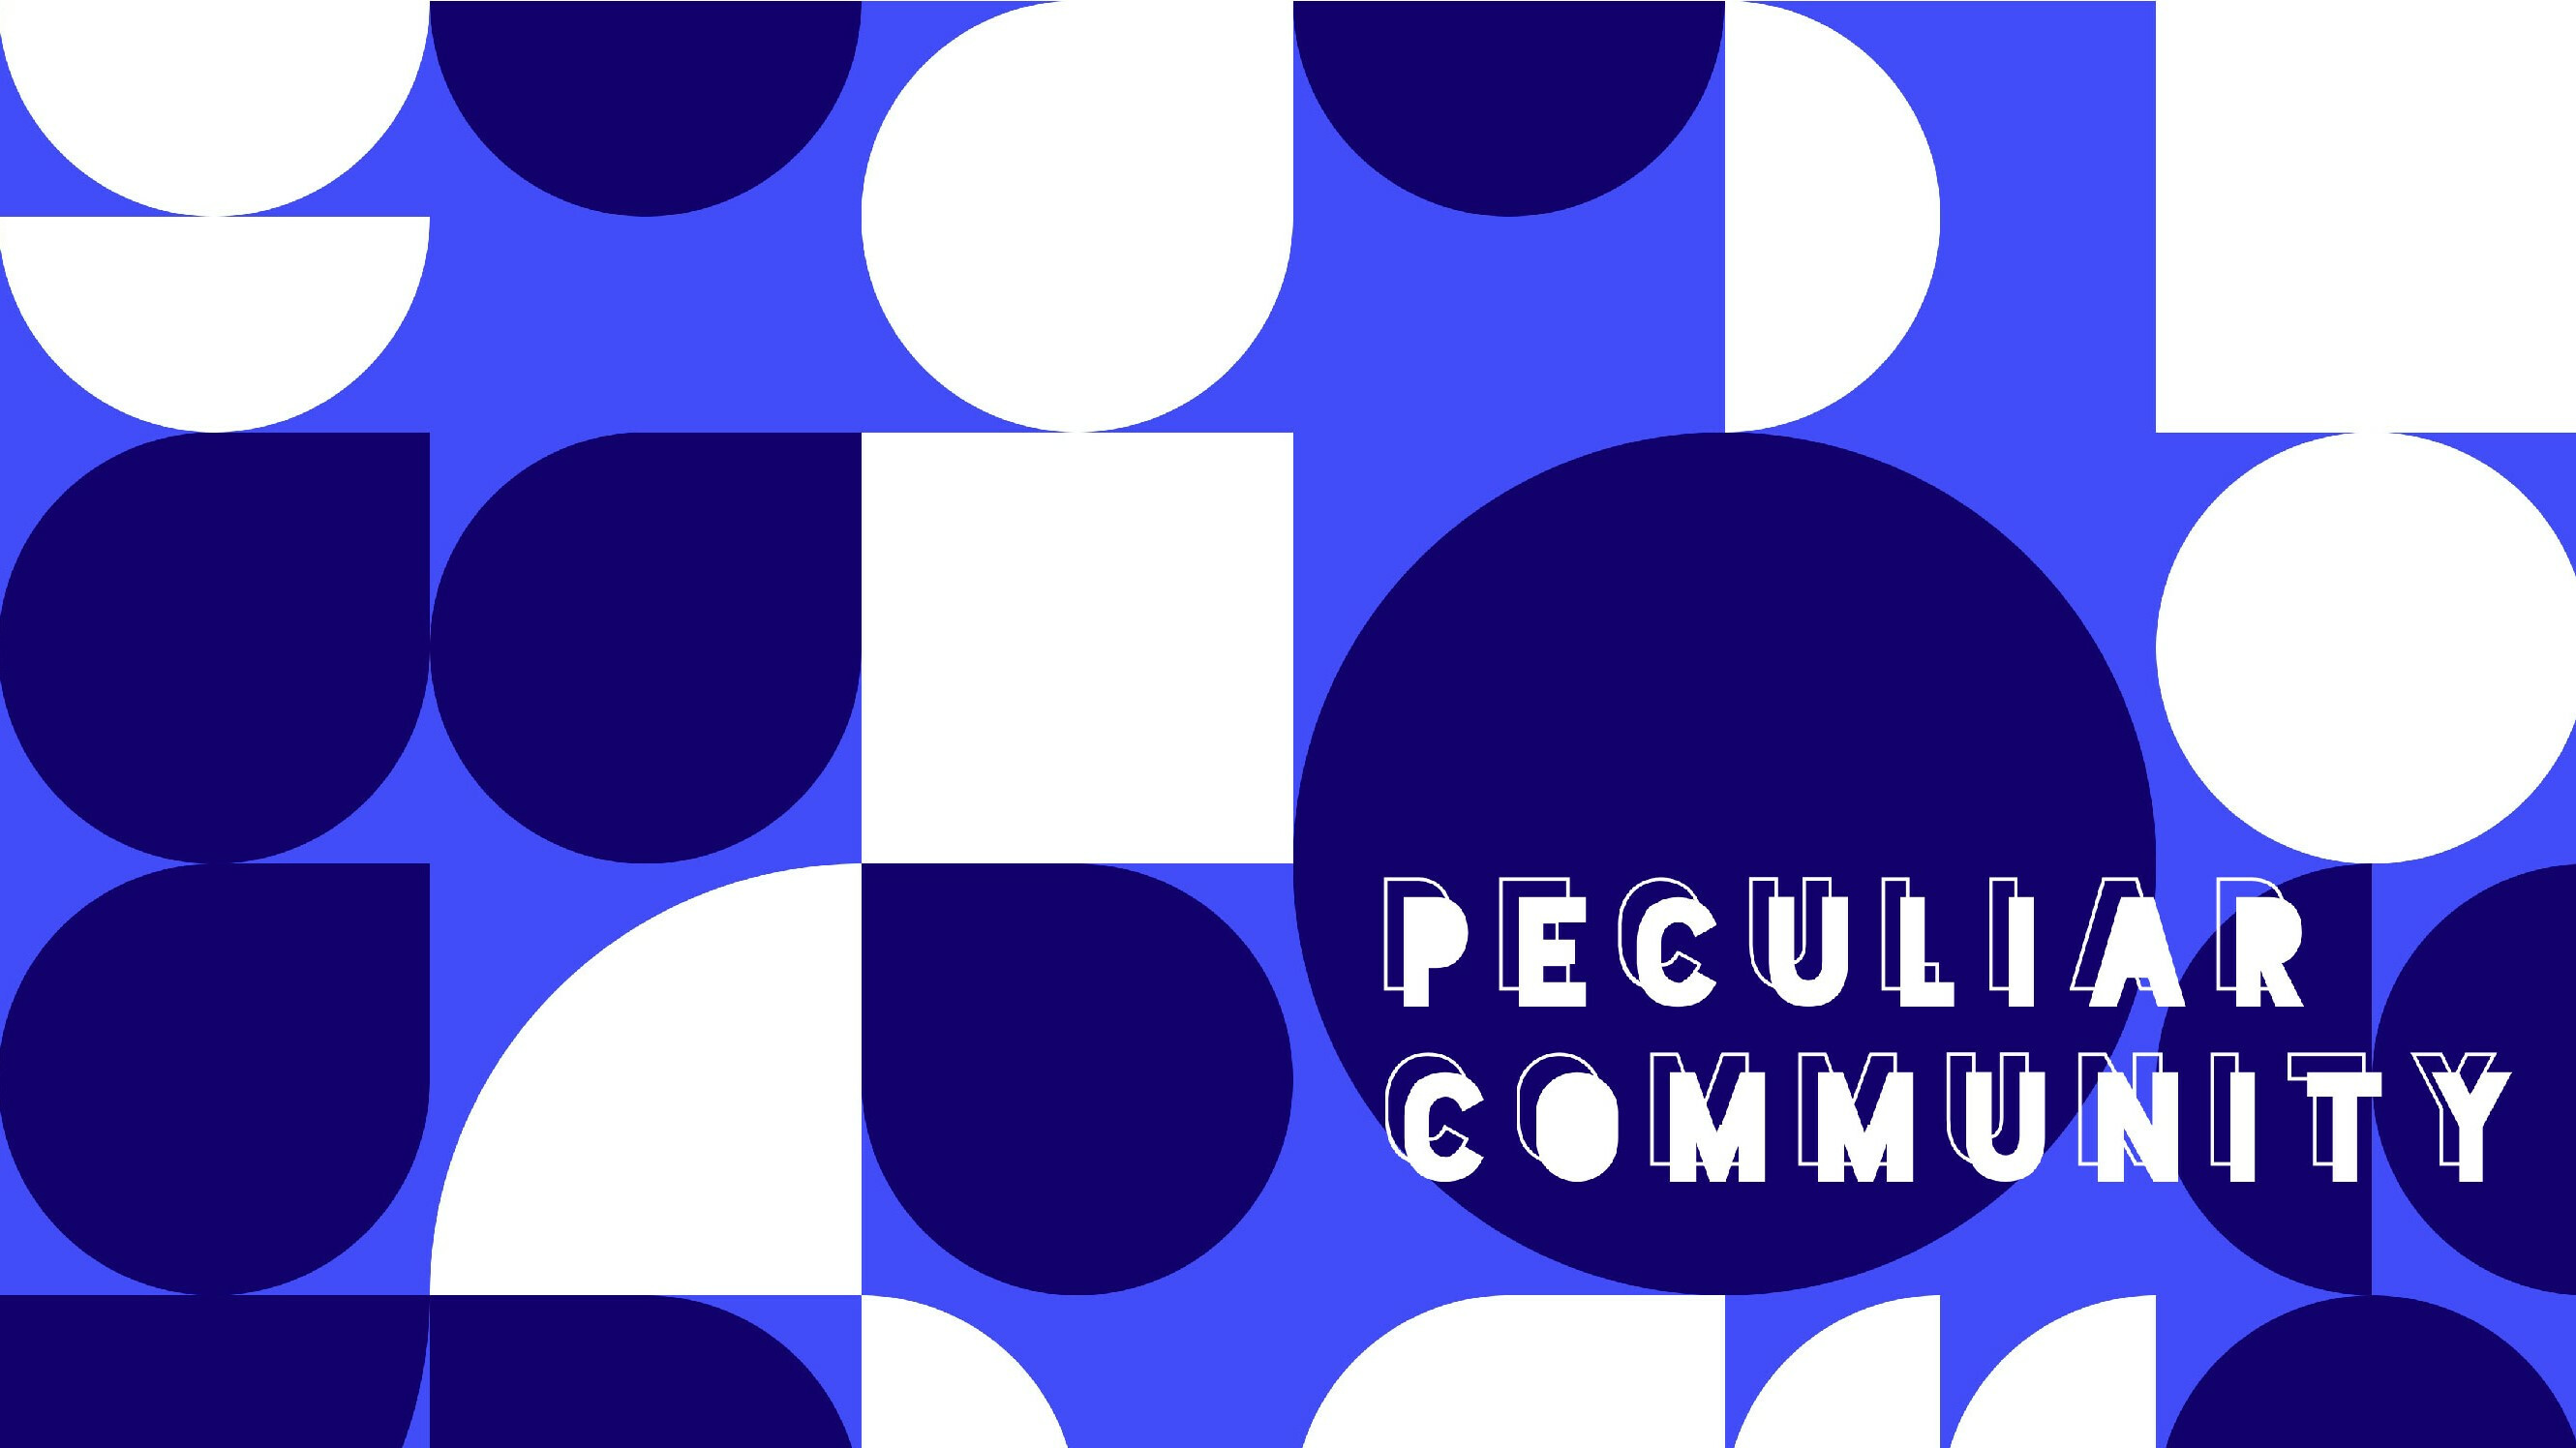 Peculiar Community - Others Centered